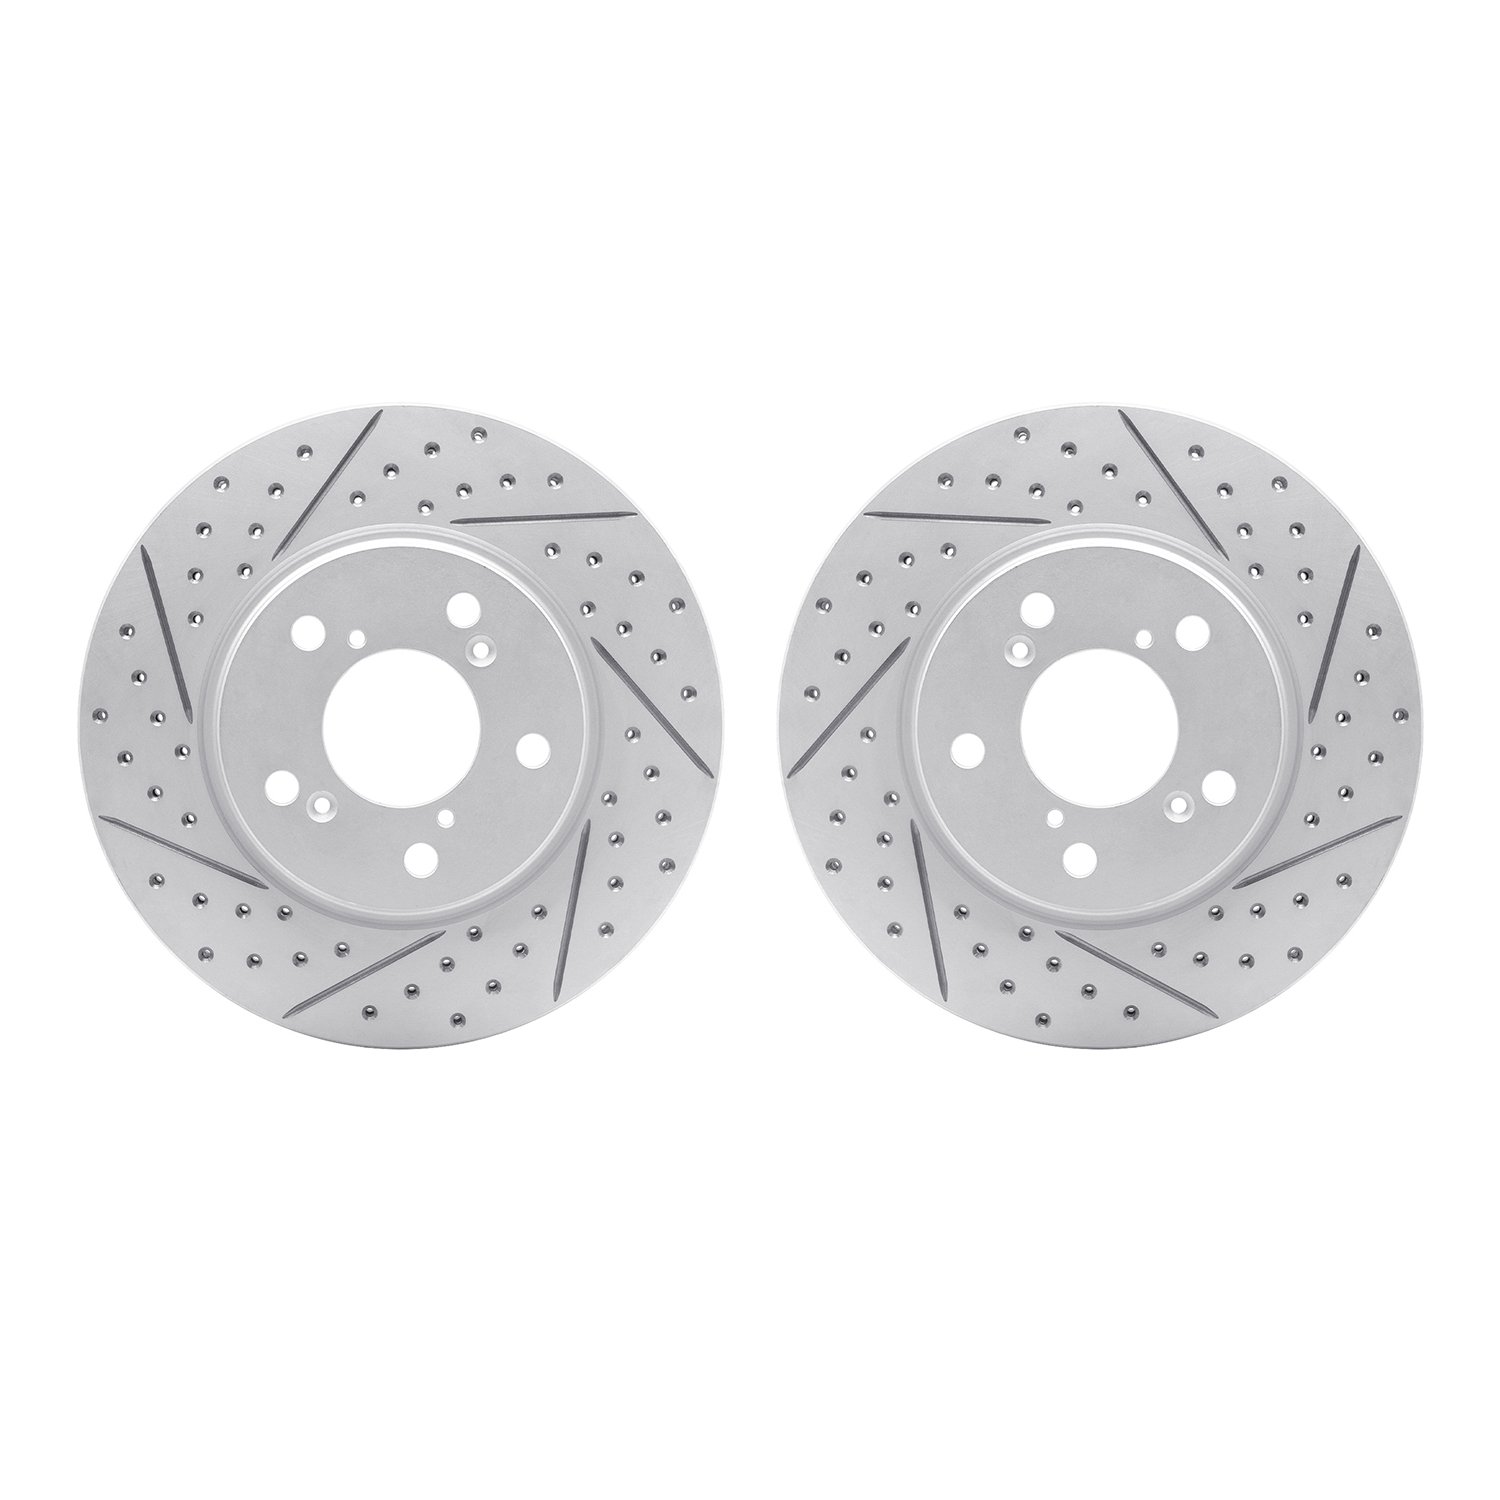 2002-59027 Geoperformance Drilled/Slotted Brake Rotors, 2005-2010 Acura/Honda, Position: Front